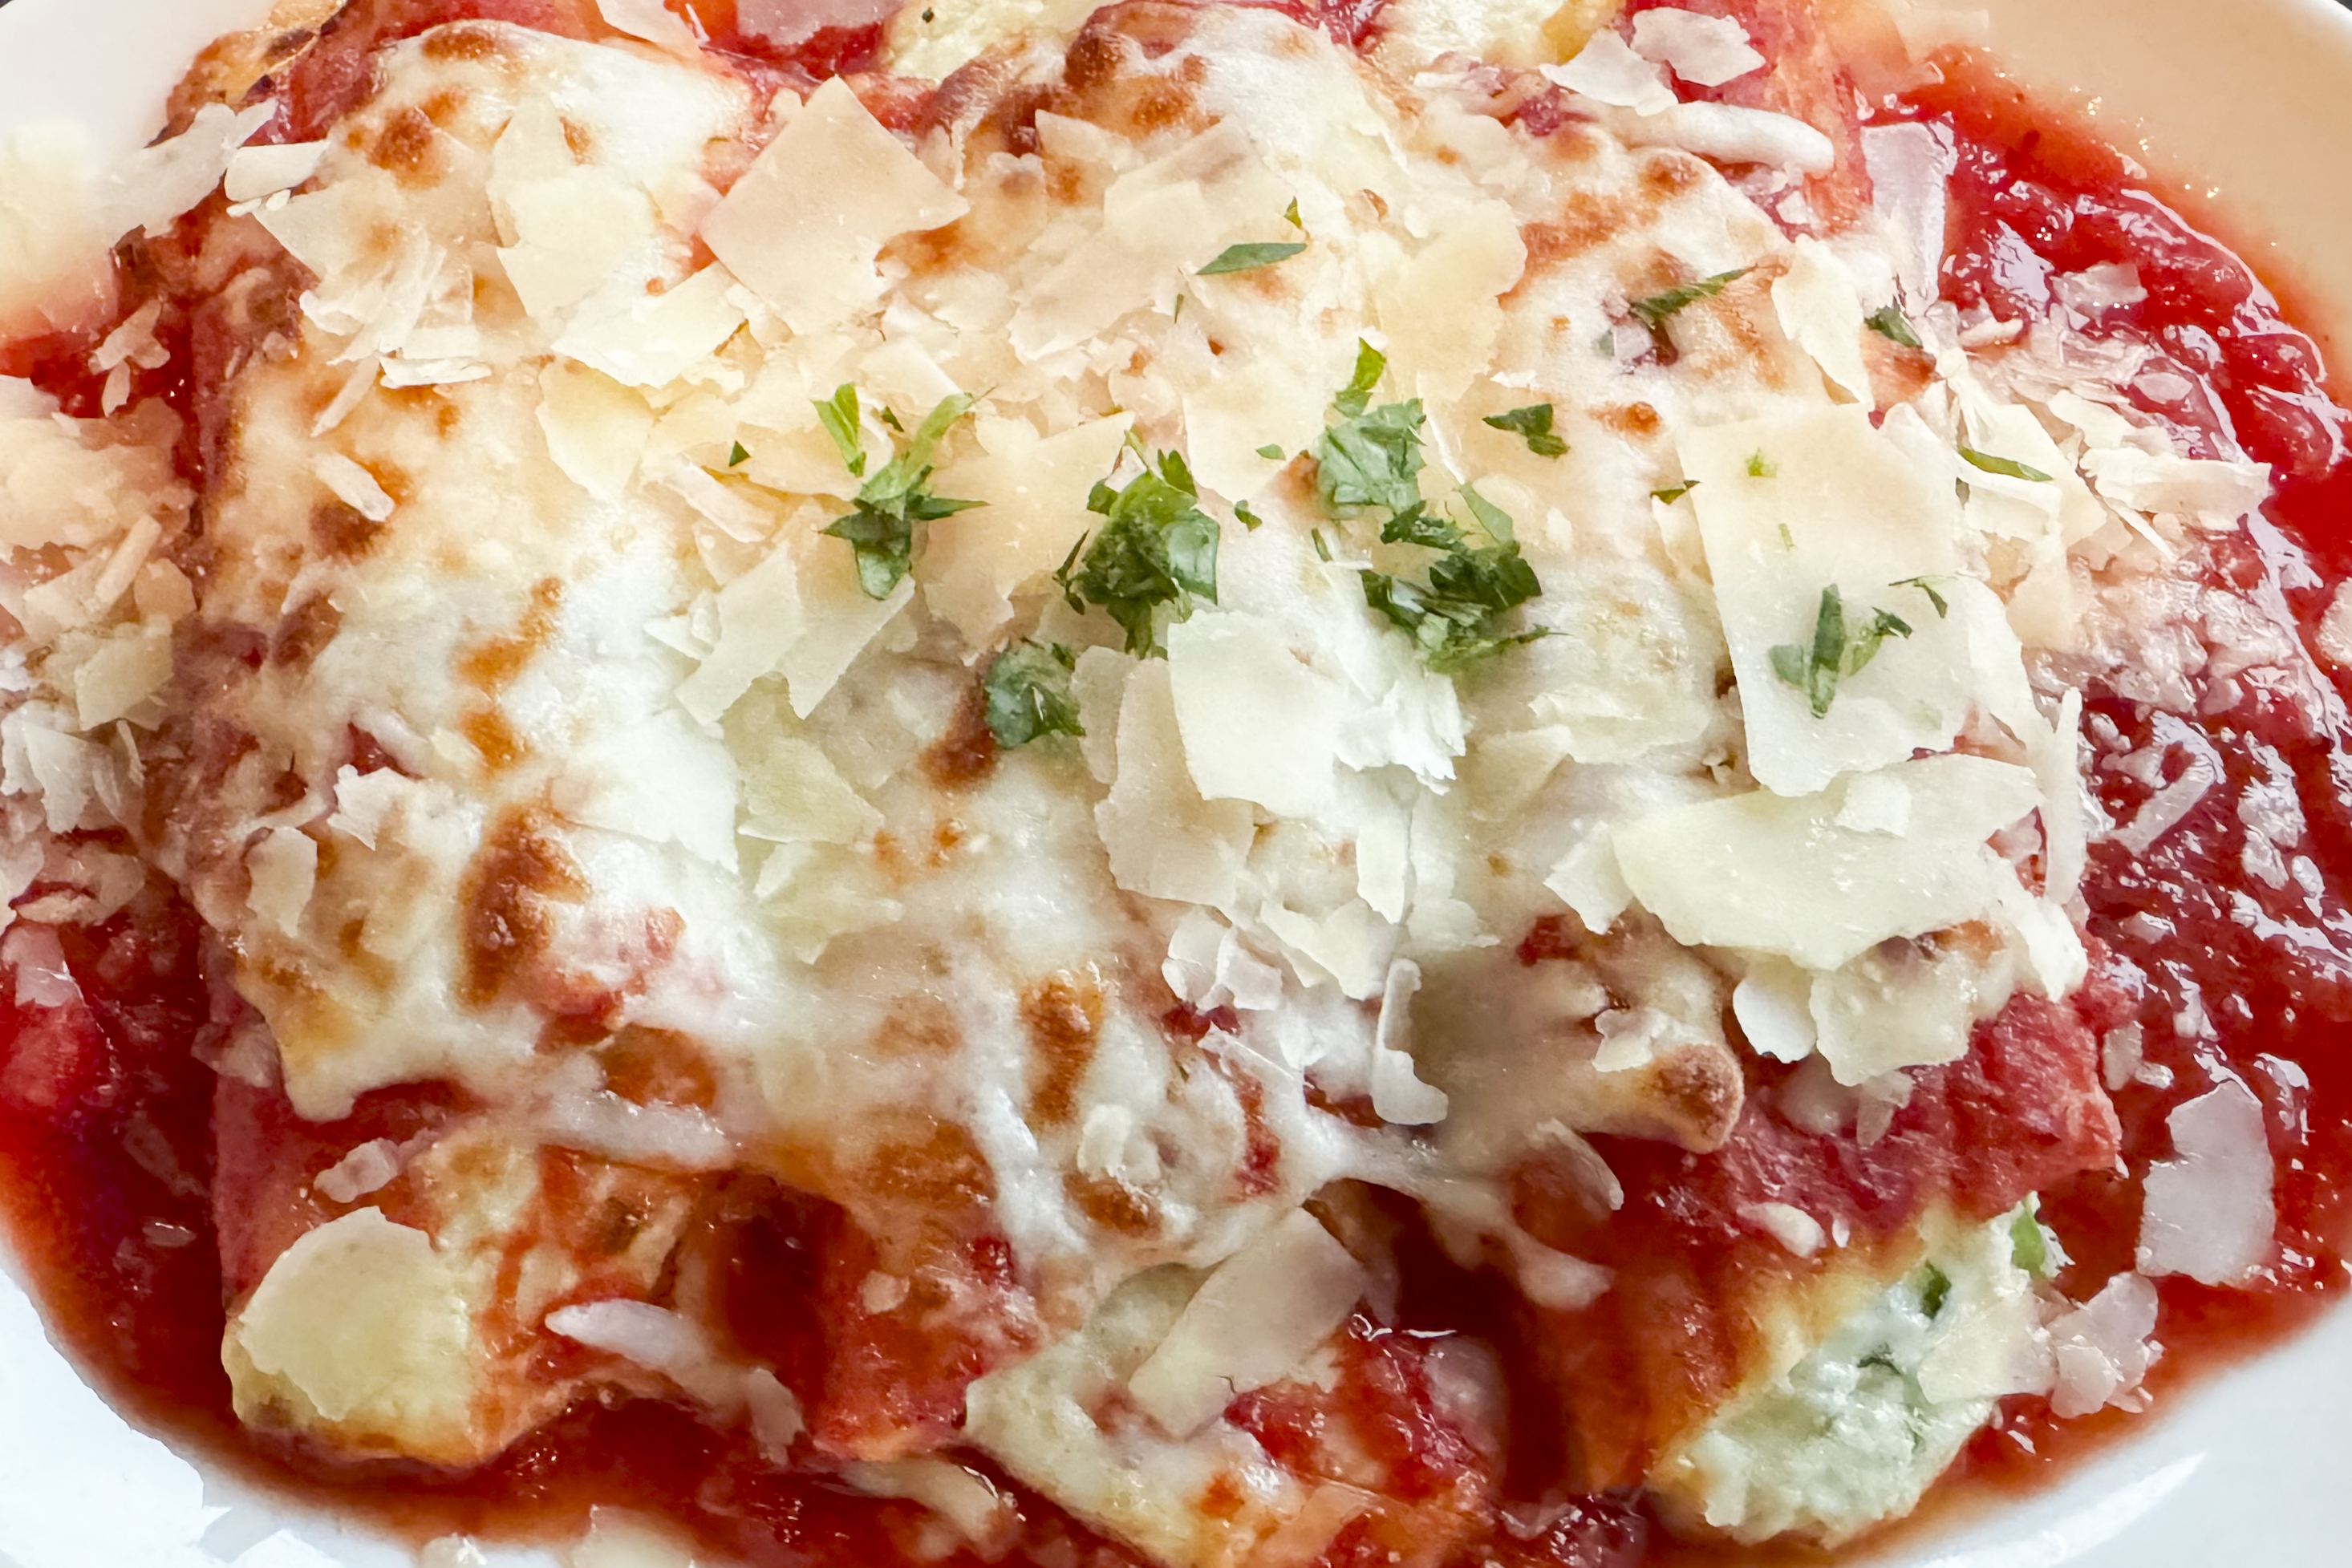 Baked 4 cheese manicotti—marinara, greens and herbs at Compass and Cleaver located at 12454 E D Ave. in Richland, Michigan.